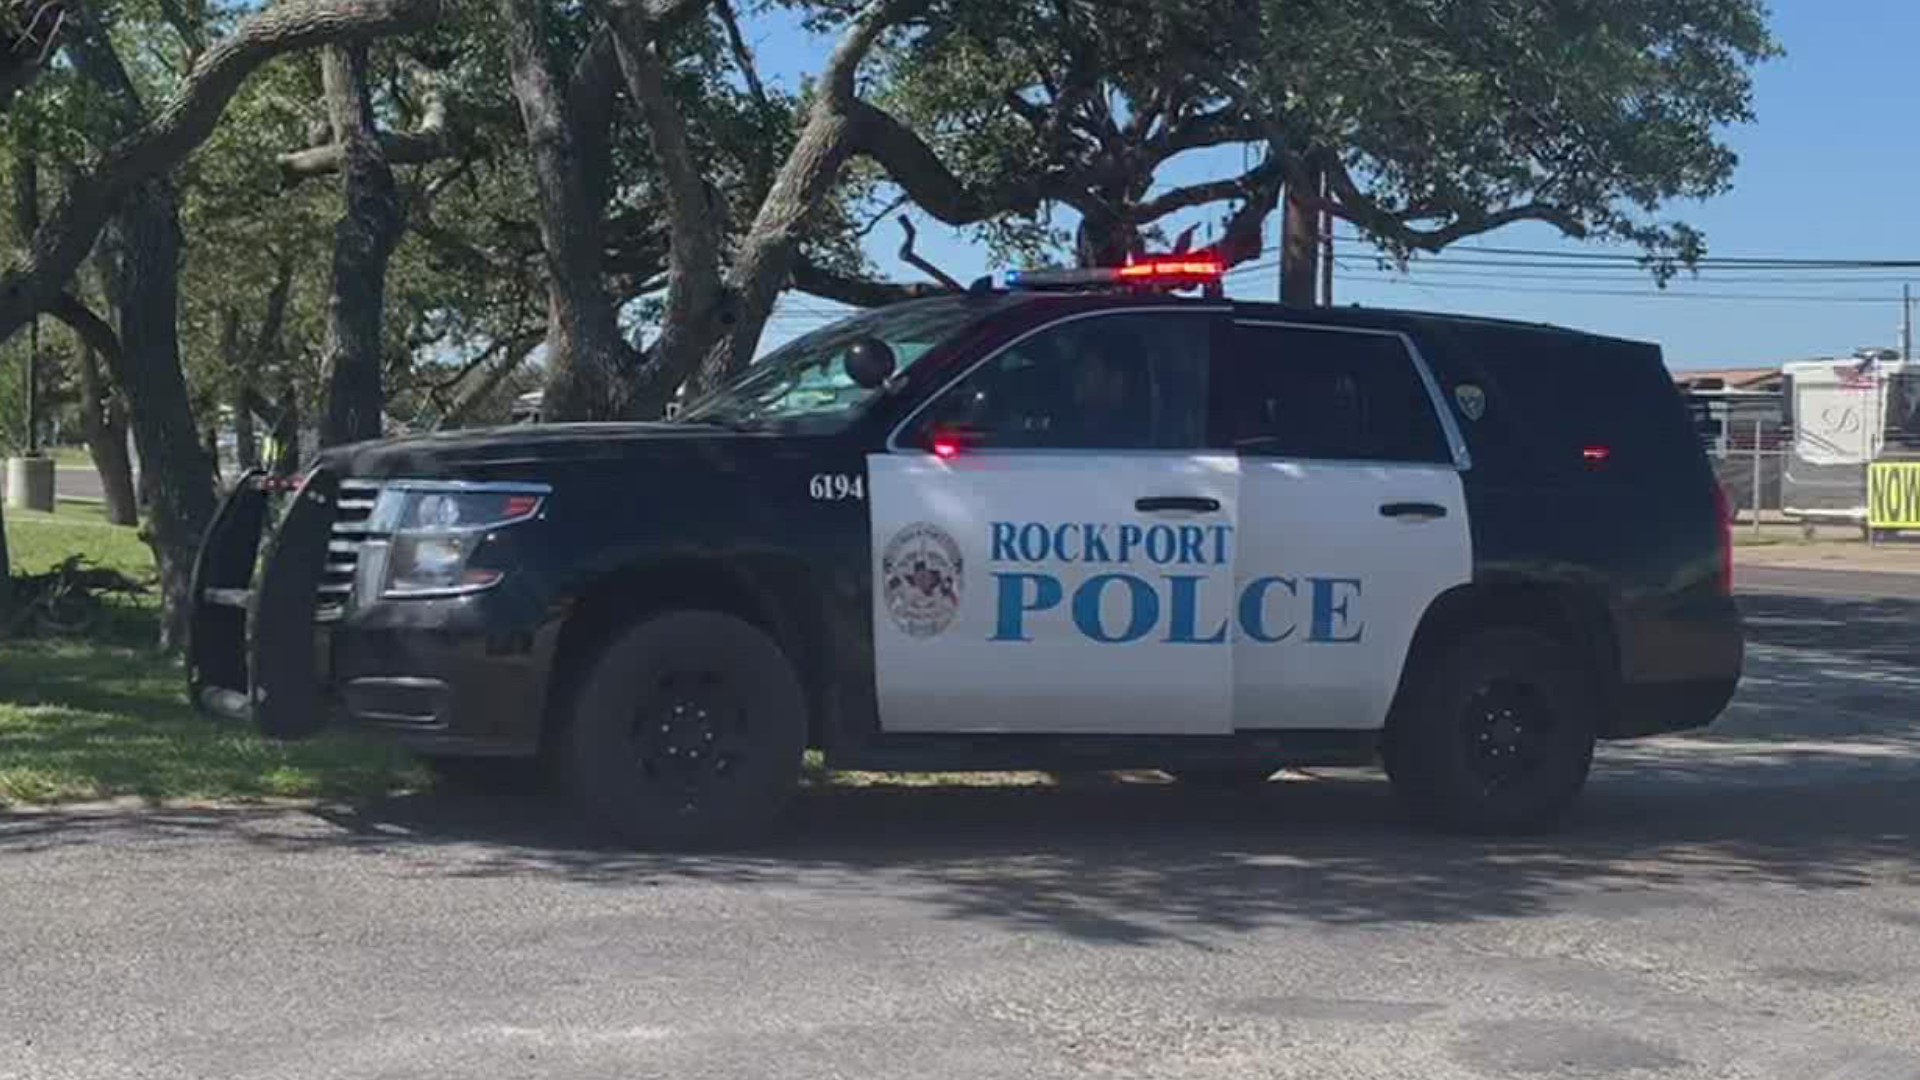 Rockport police say they arrested a man there for breaking into at least 19 vehicles and stealing six guns. All bought by a Corpus Christi man in exchange for drugs.